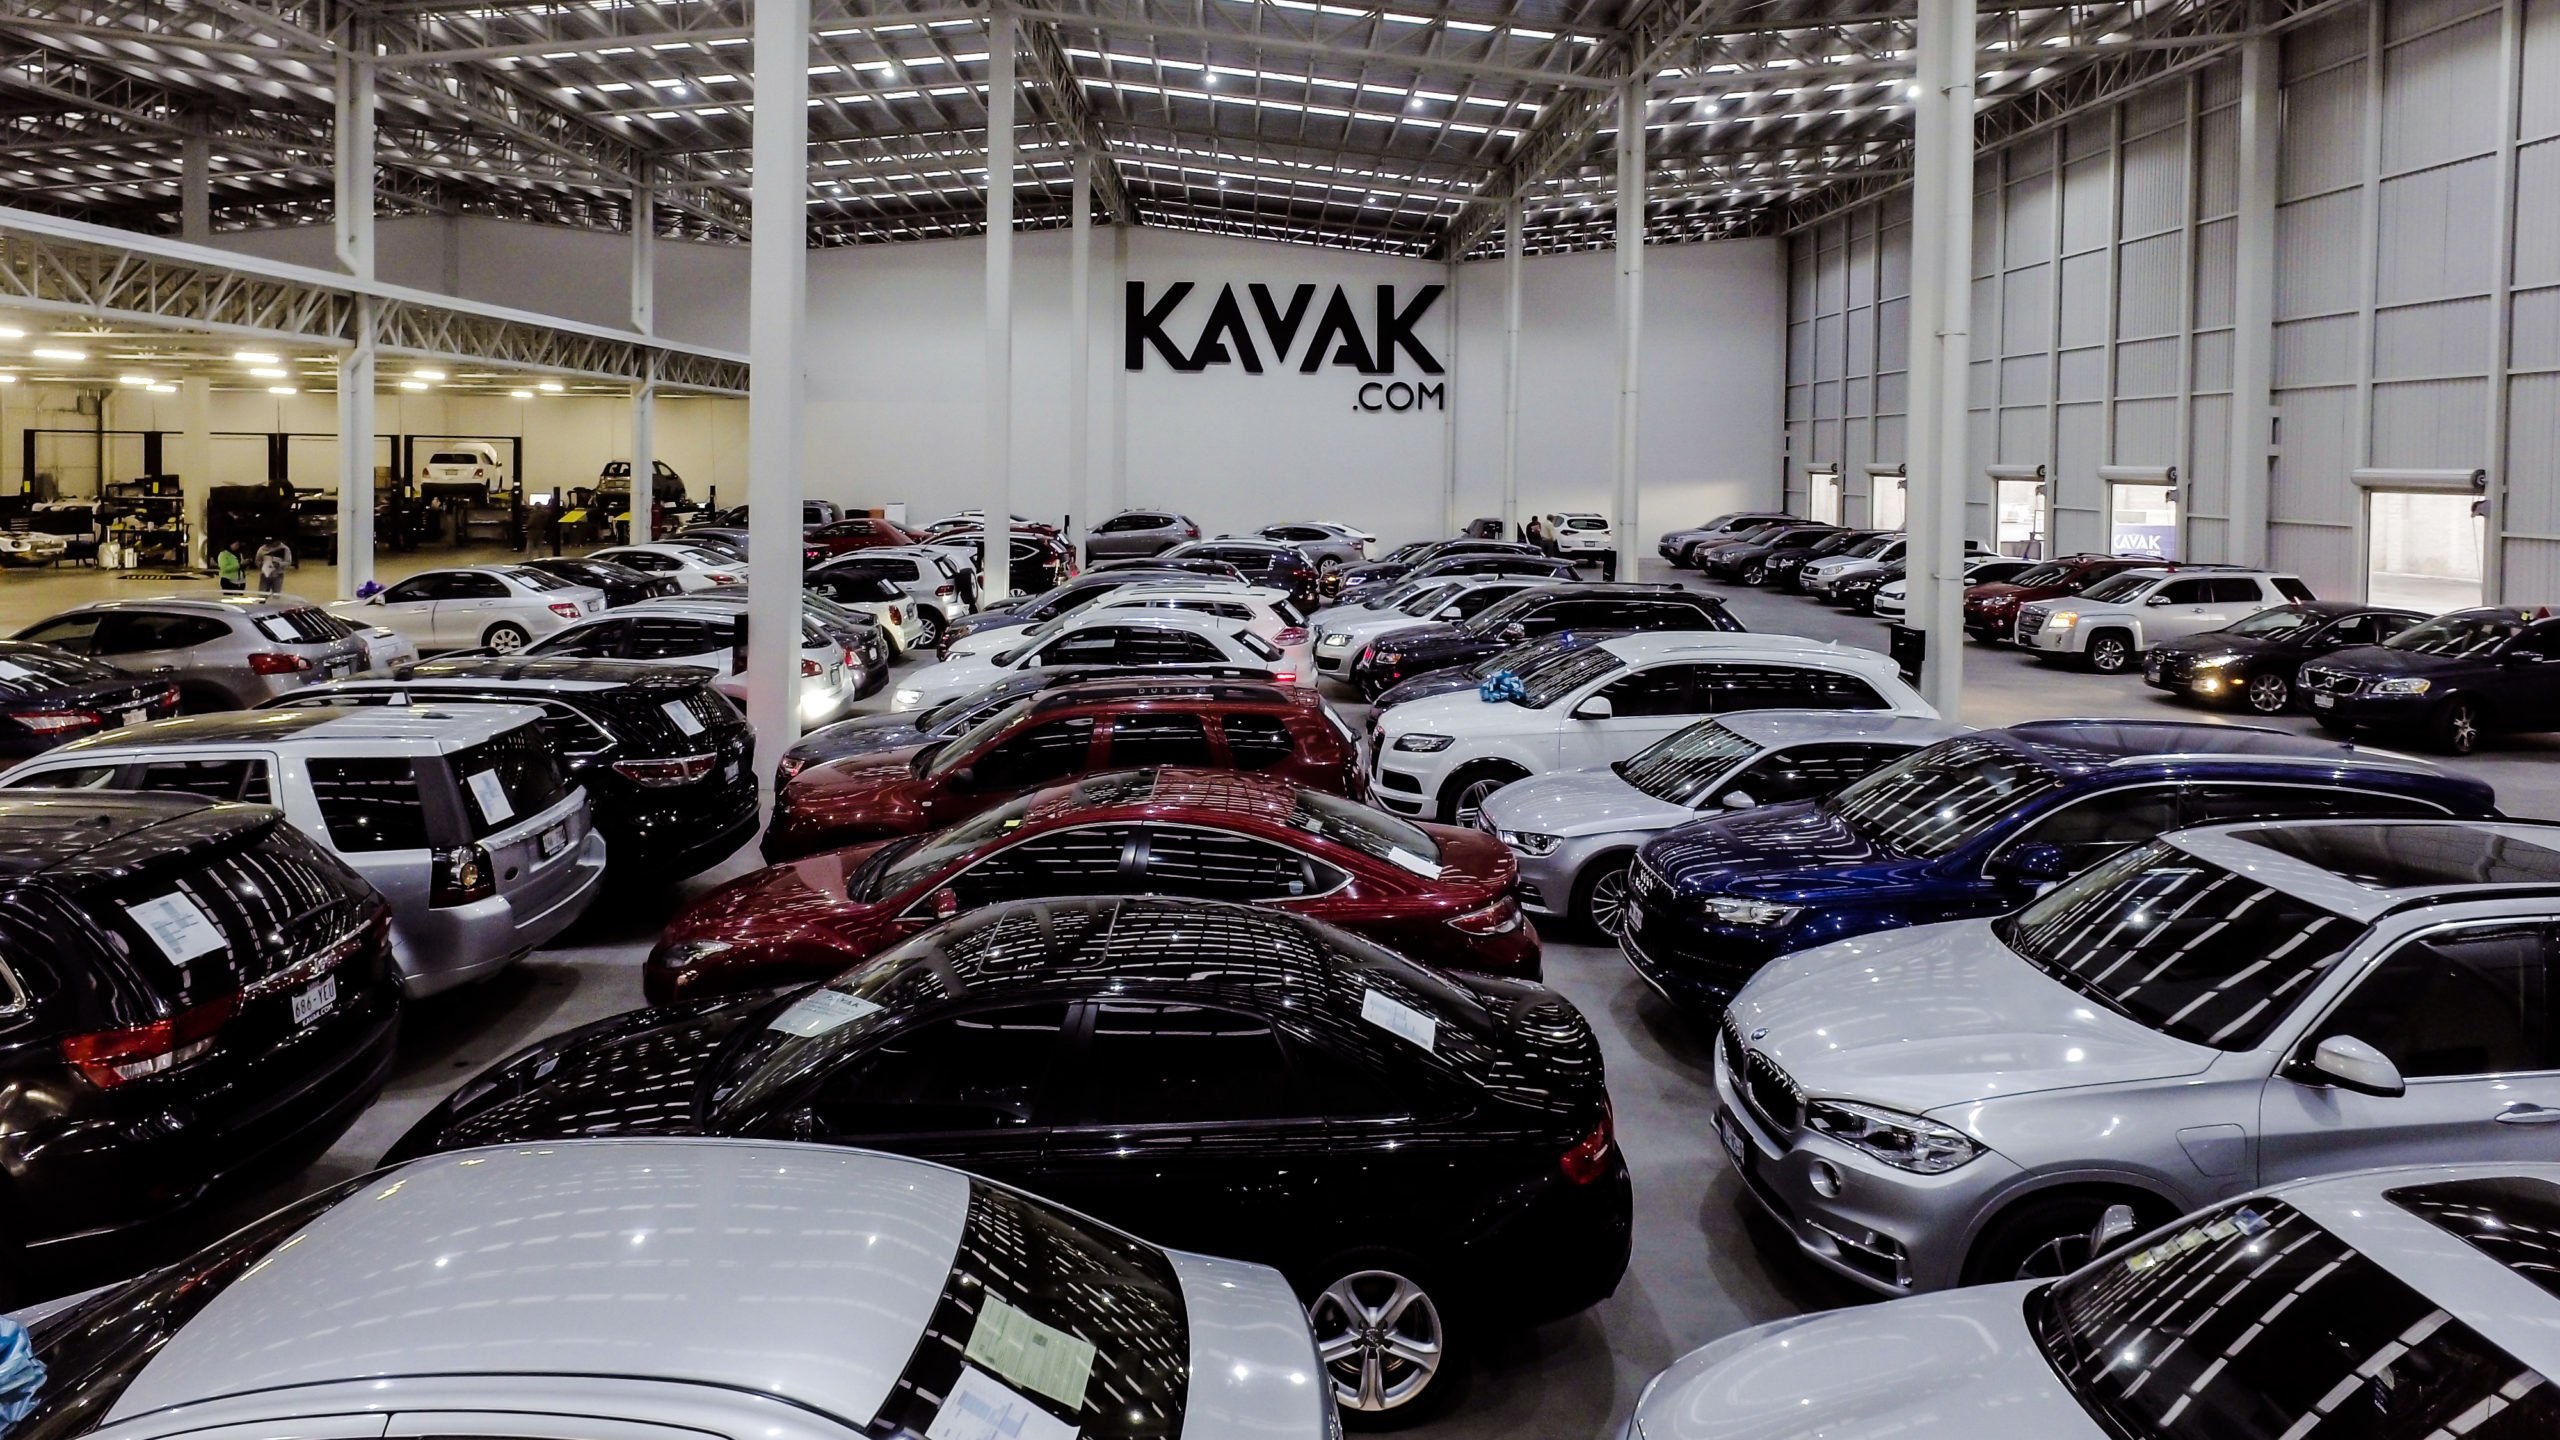 Kavak invests 365 million pesos in Nuevo León to strengthen the automotive industry